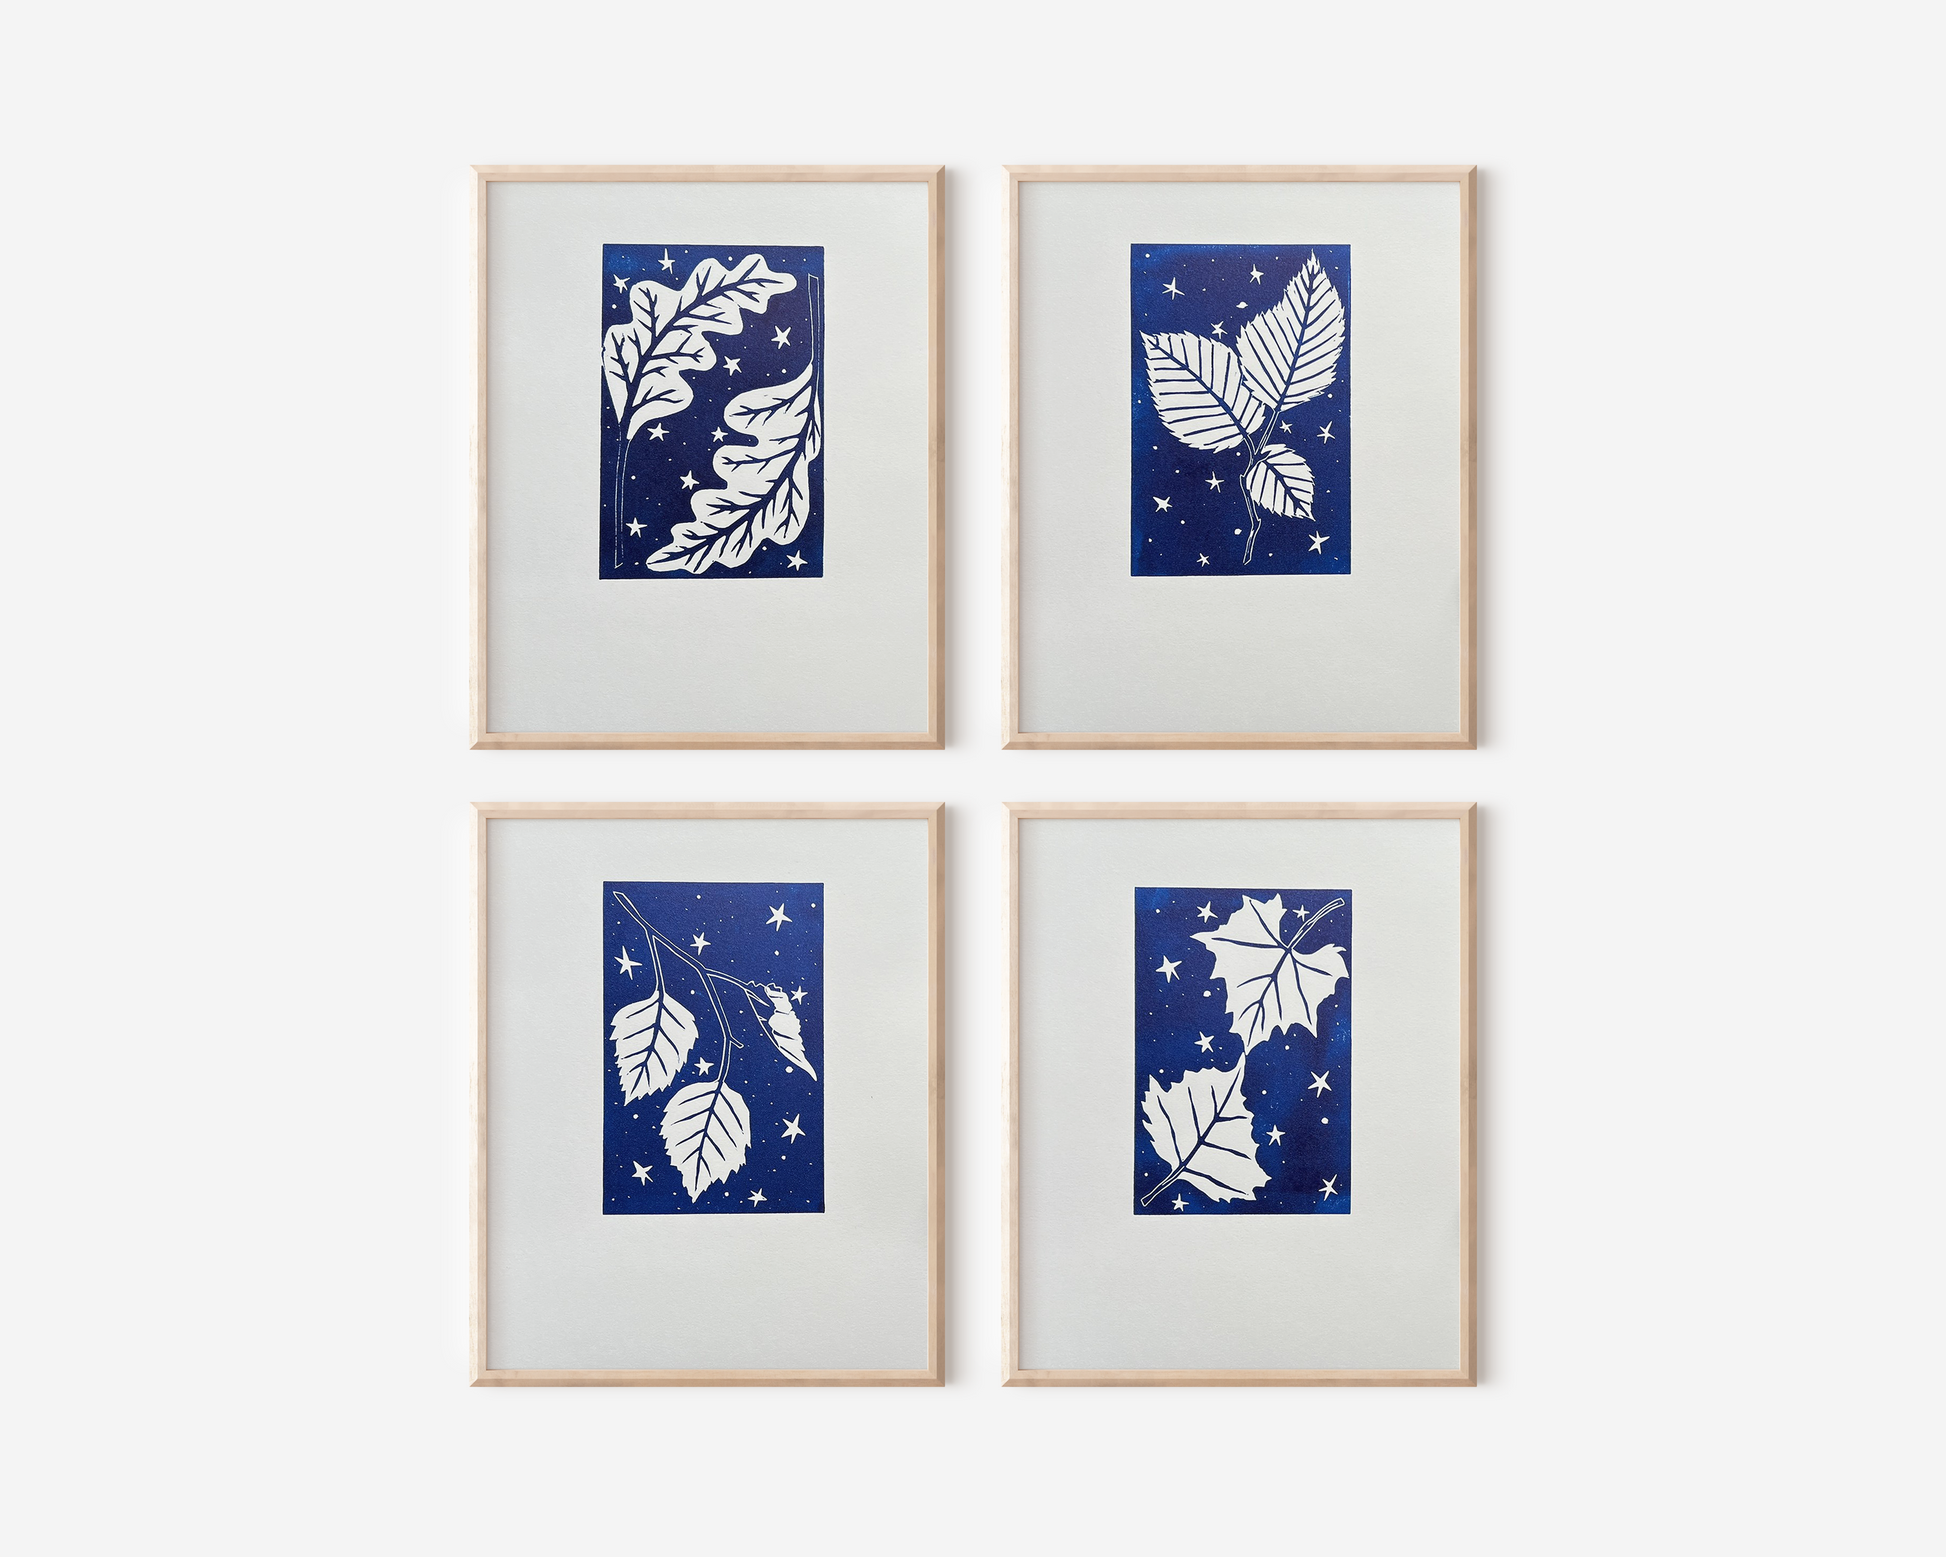 A mockup of all four prints framed on a white wall